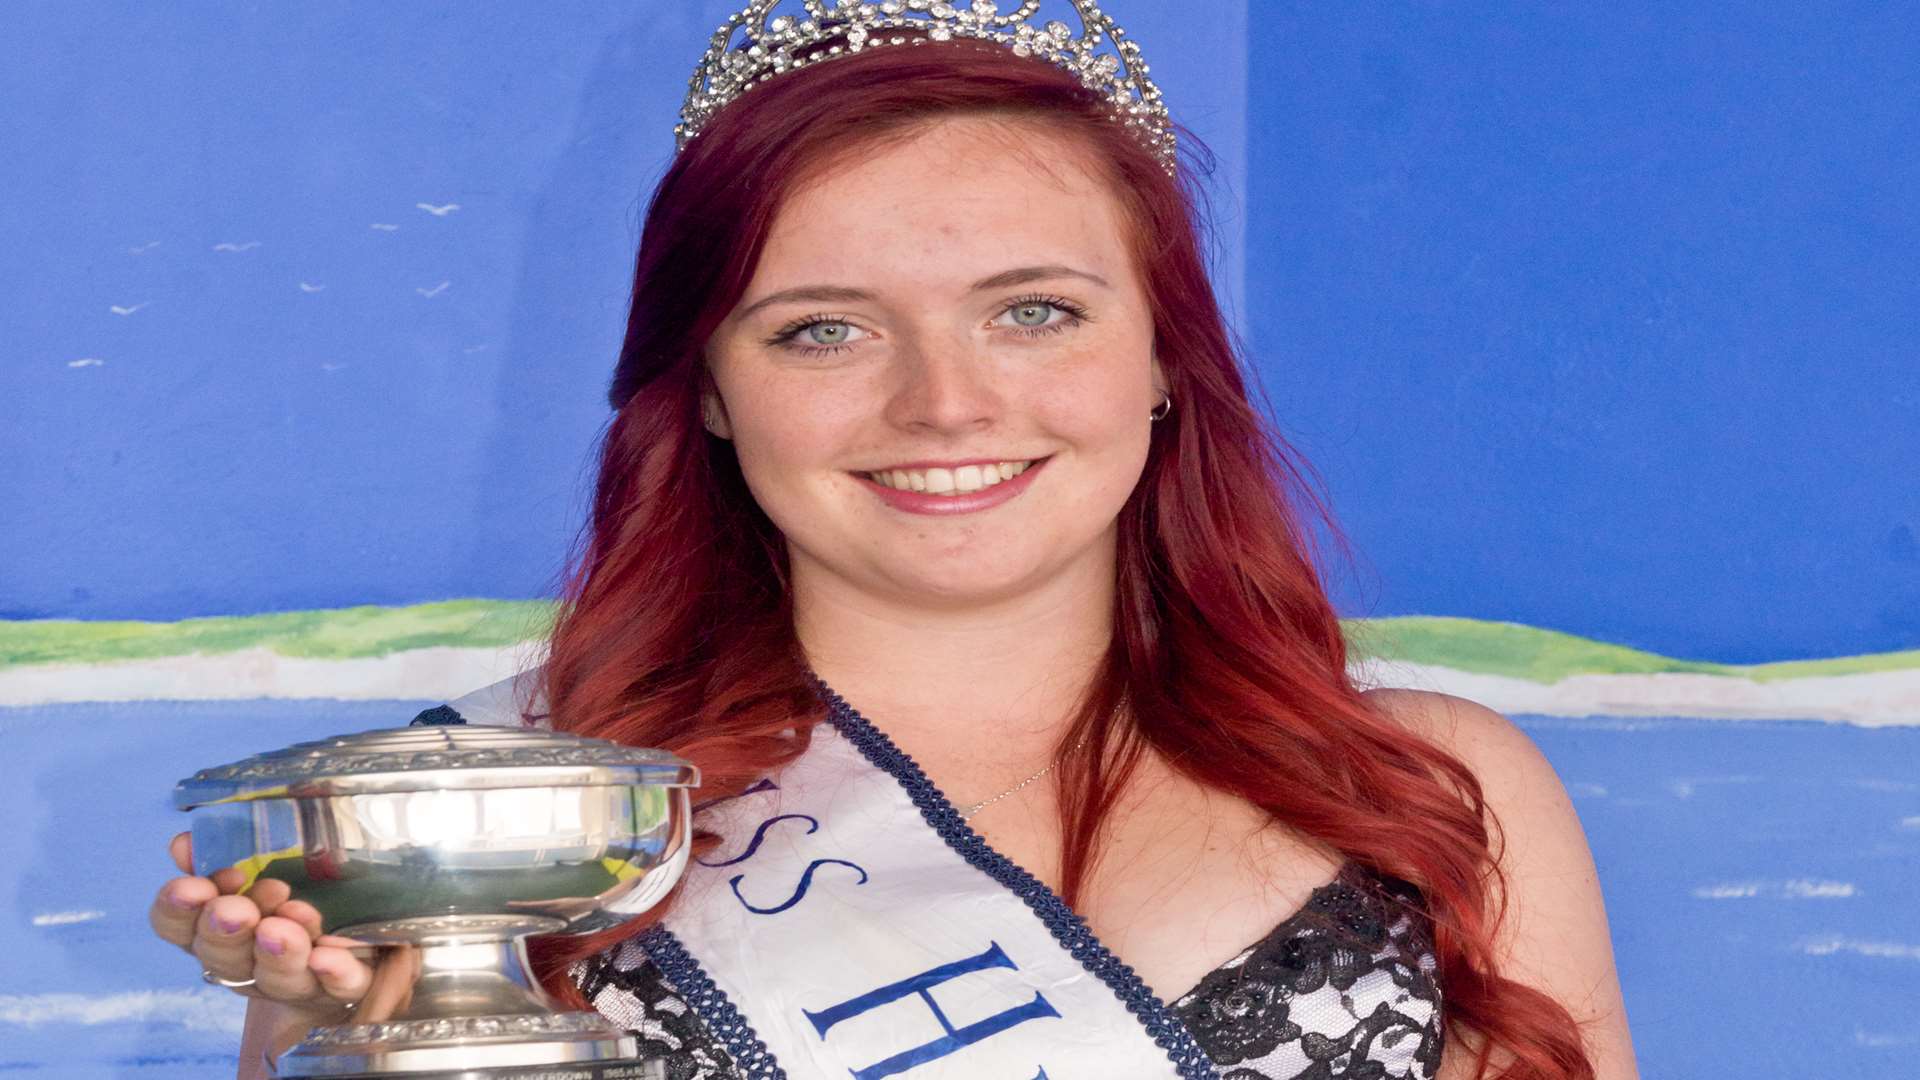 Last year's Herne Bay Carnival Queen was 18-year-old Aurora Summers